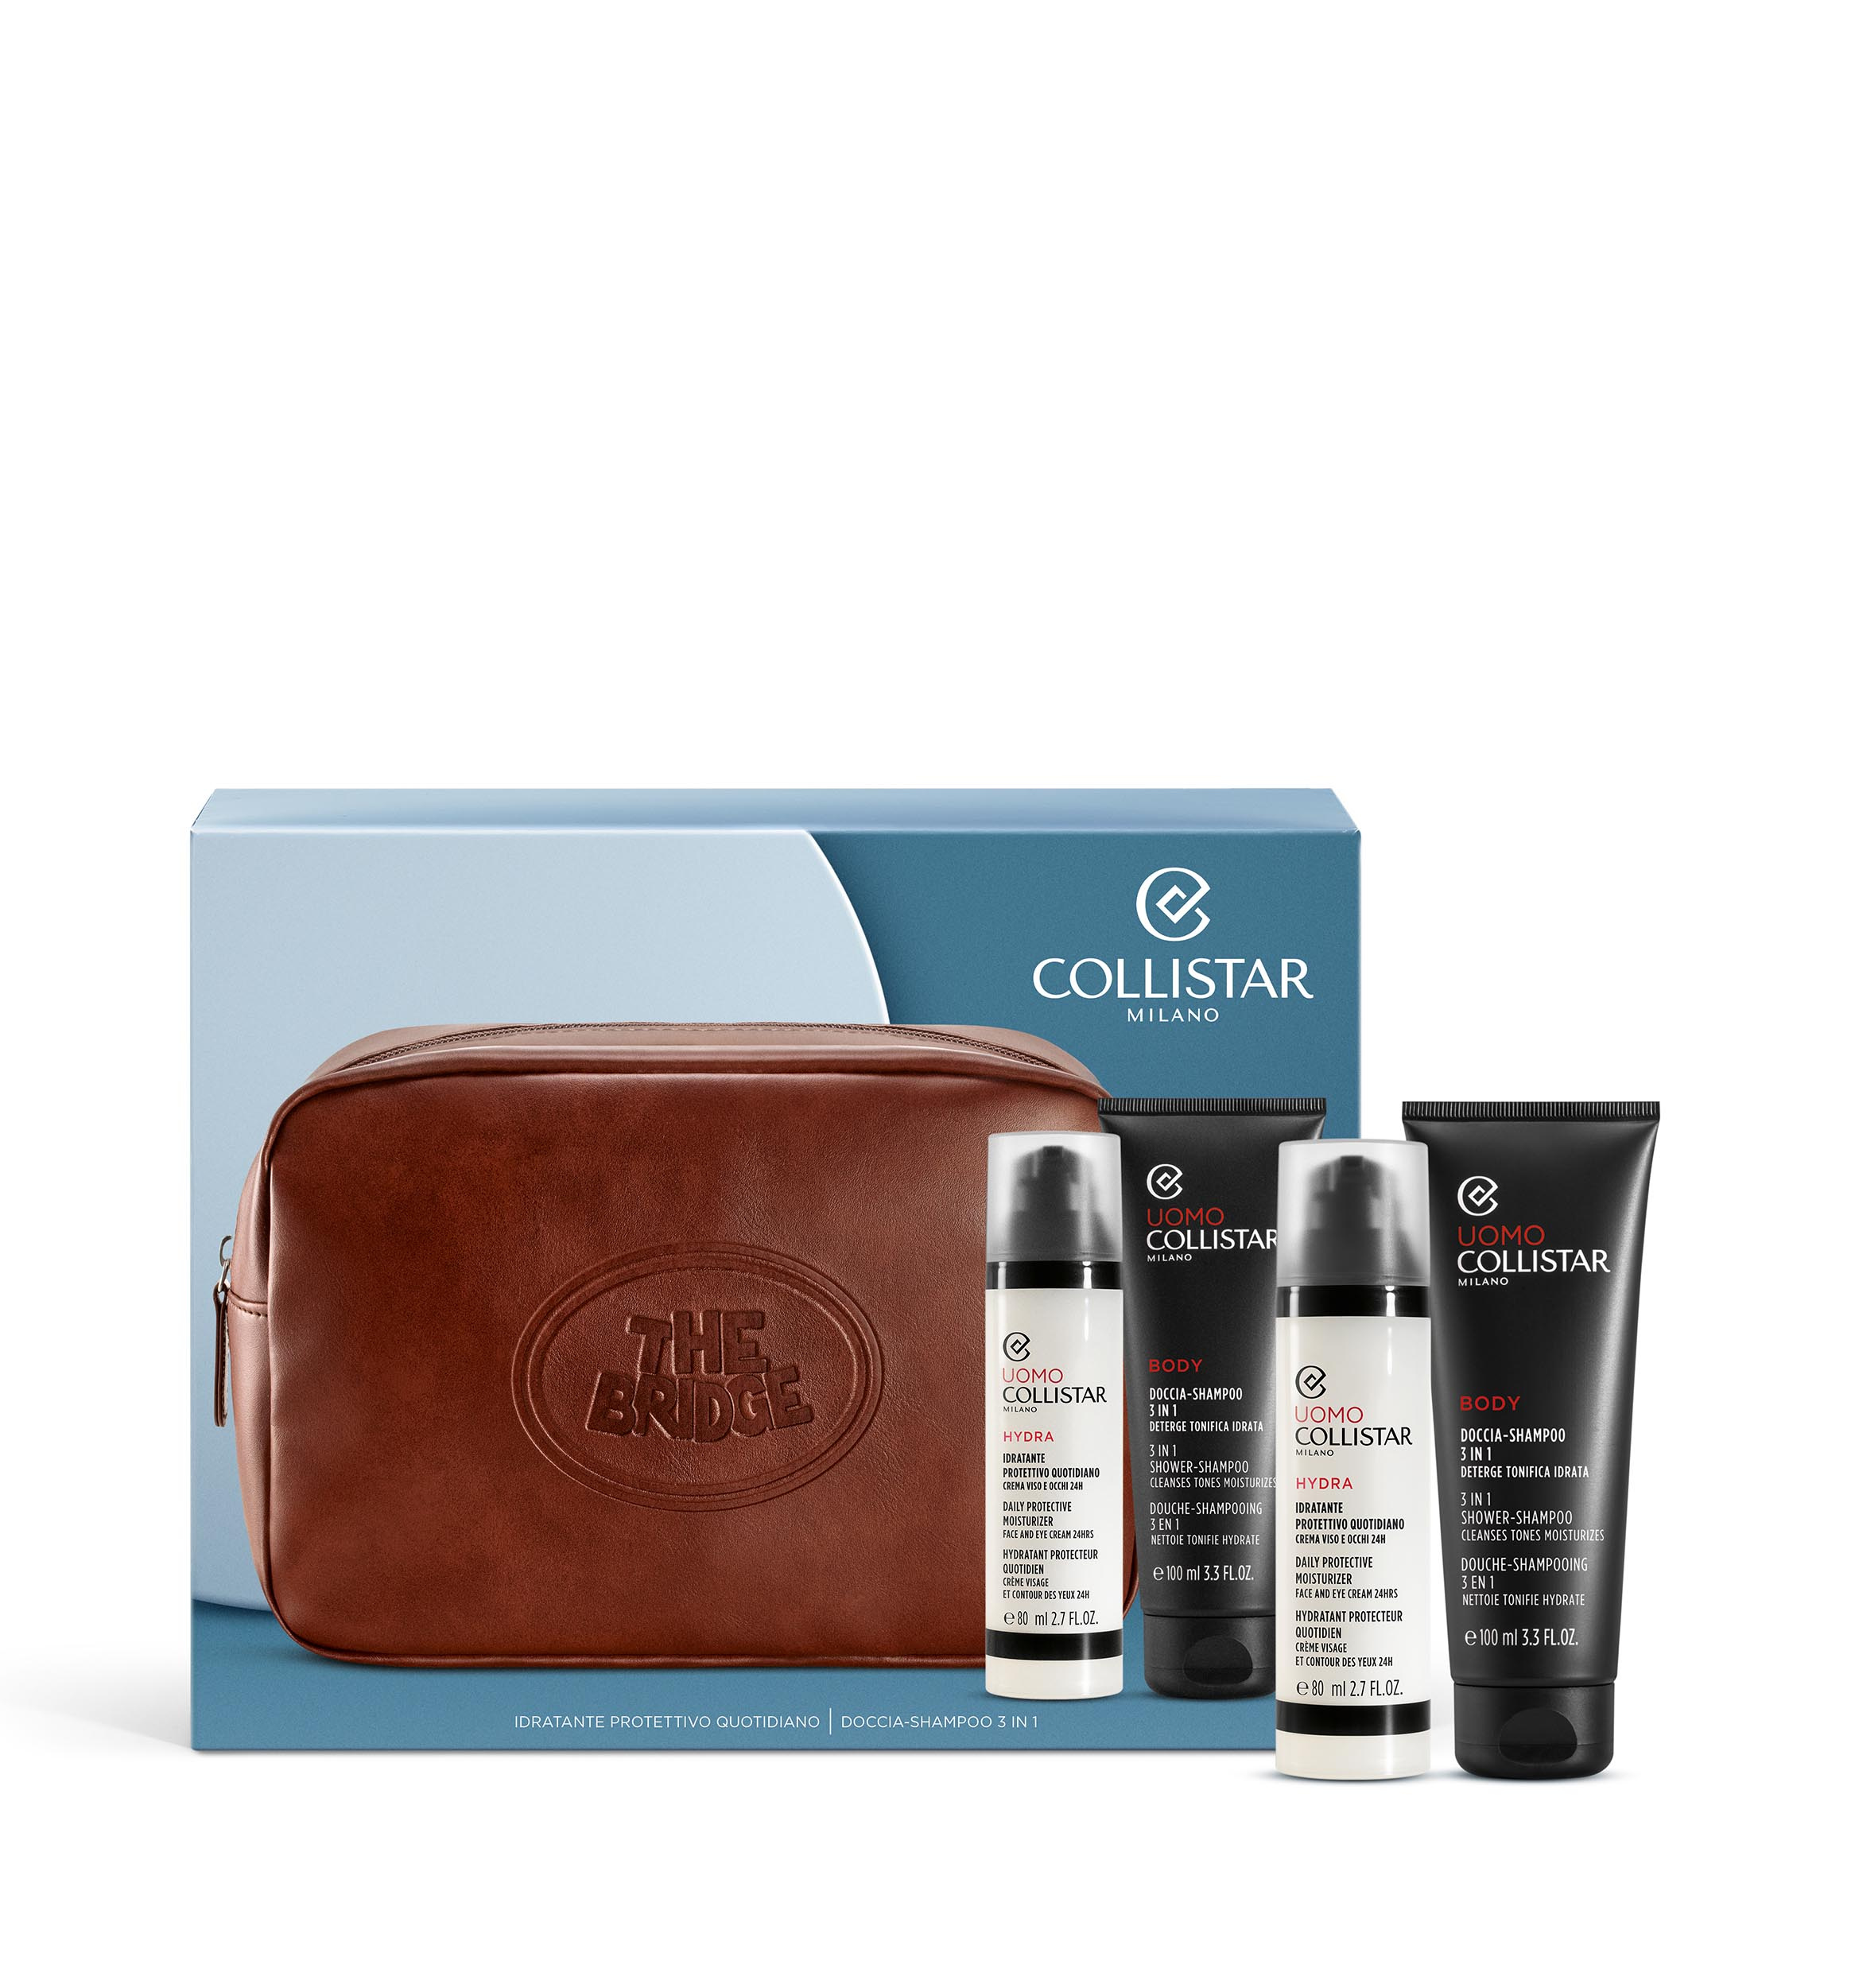 DAILY PROTECTIVE MOISTURIZER FACE 80 ml GIFT SET - New | Collistar - Shop Online Ufficiale